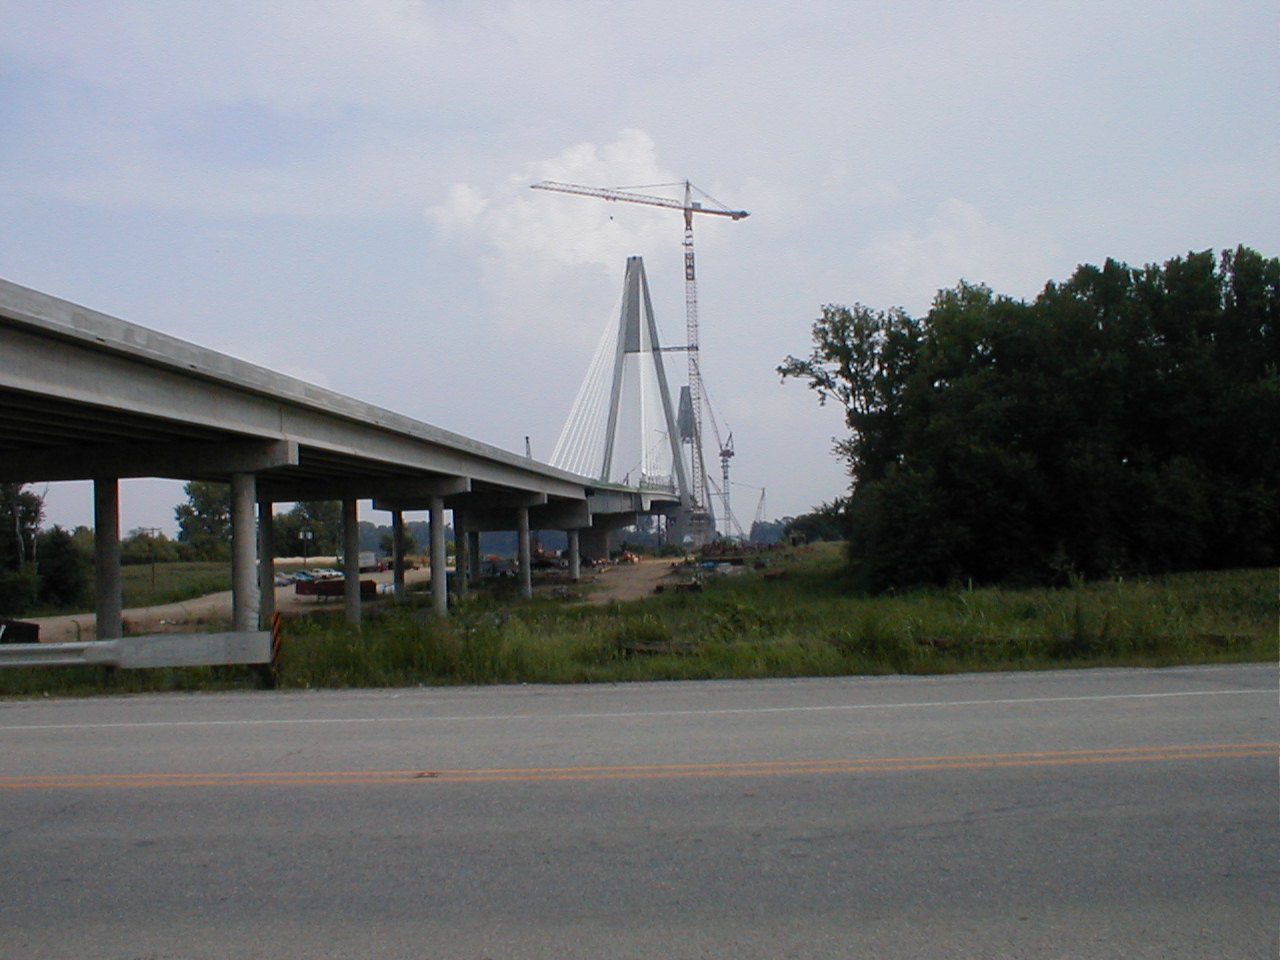 Taken near the IN 66/US 231 intersection. Both towers and the deck are visible.